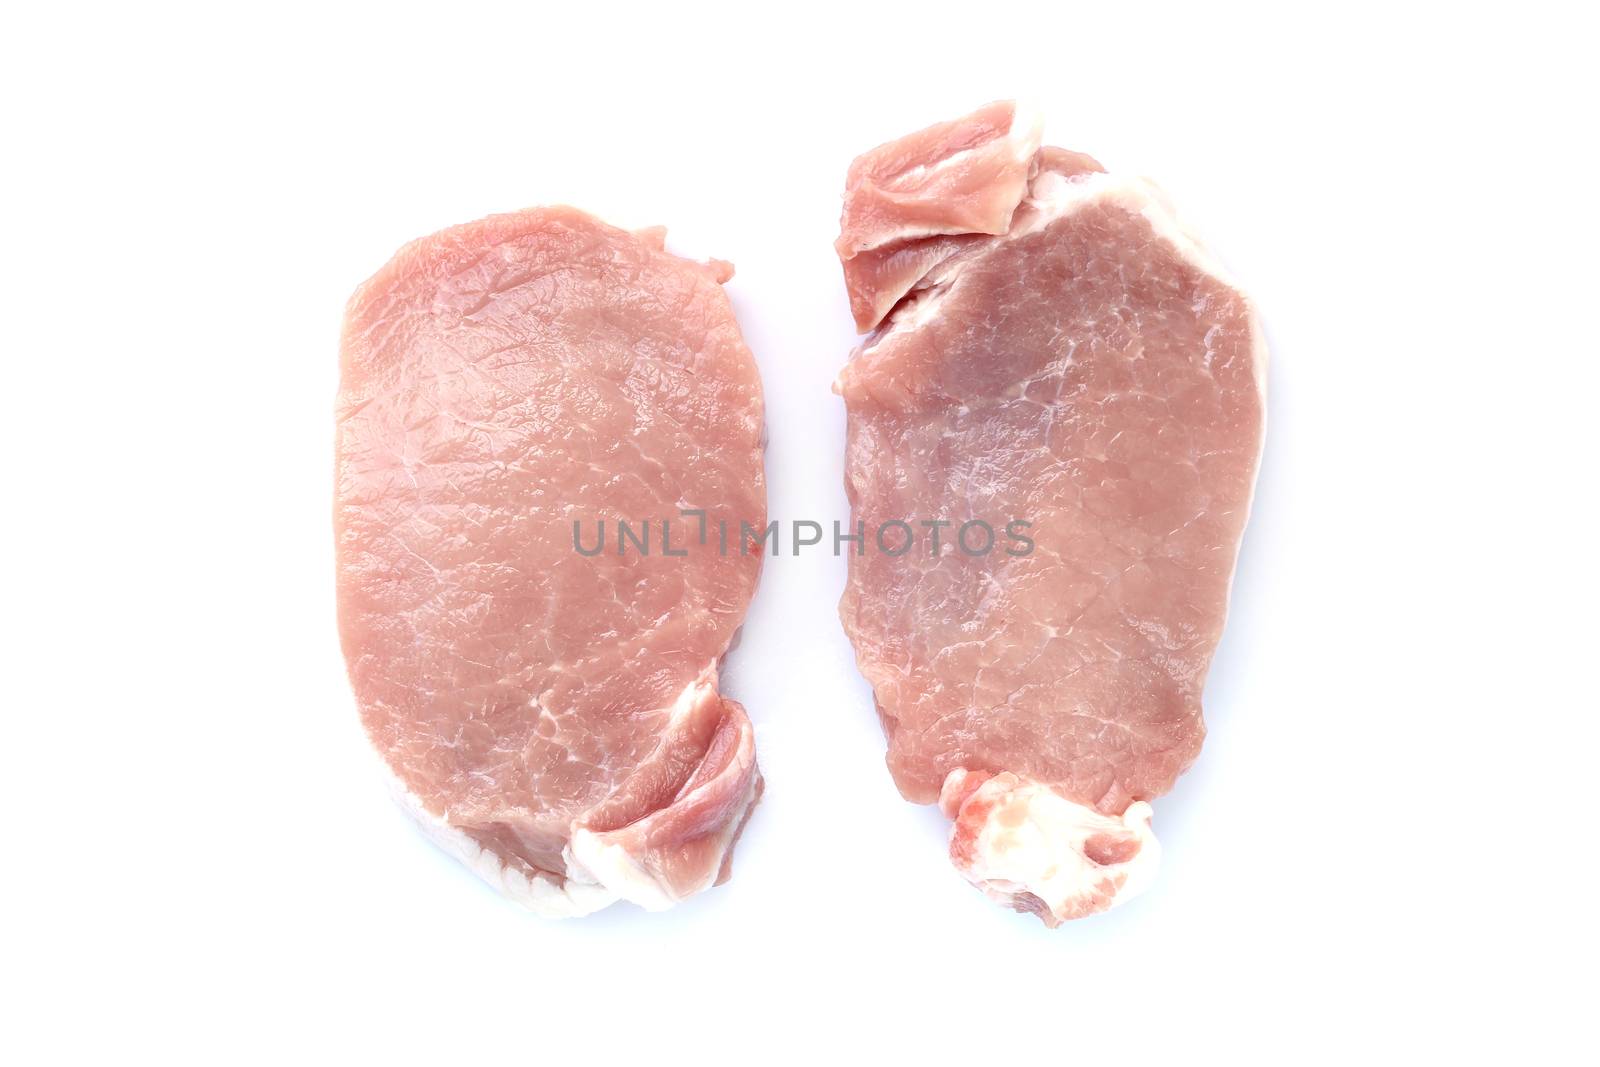 Image of raw meat pork on a white background by yod67